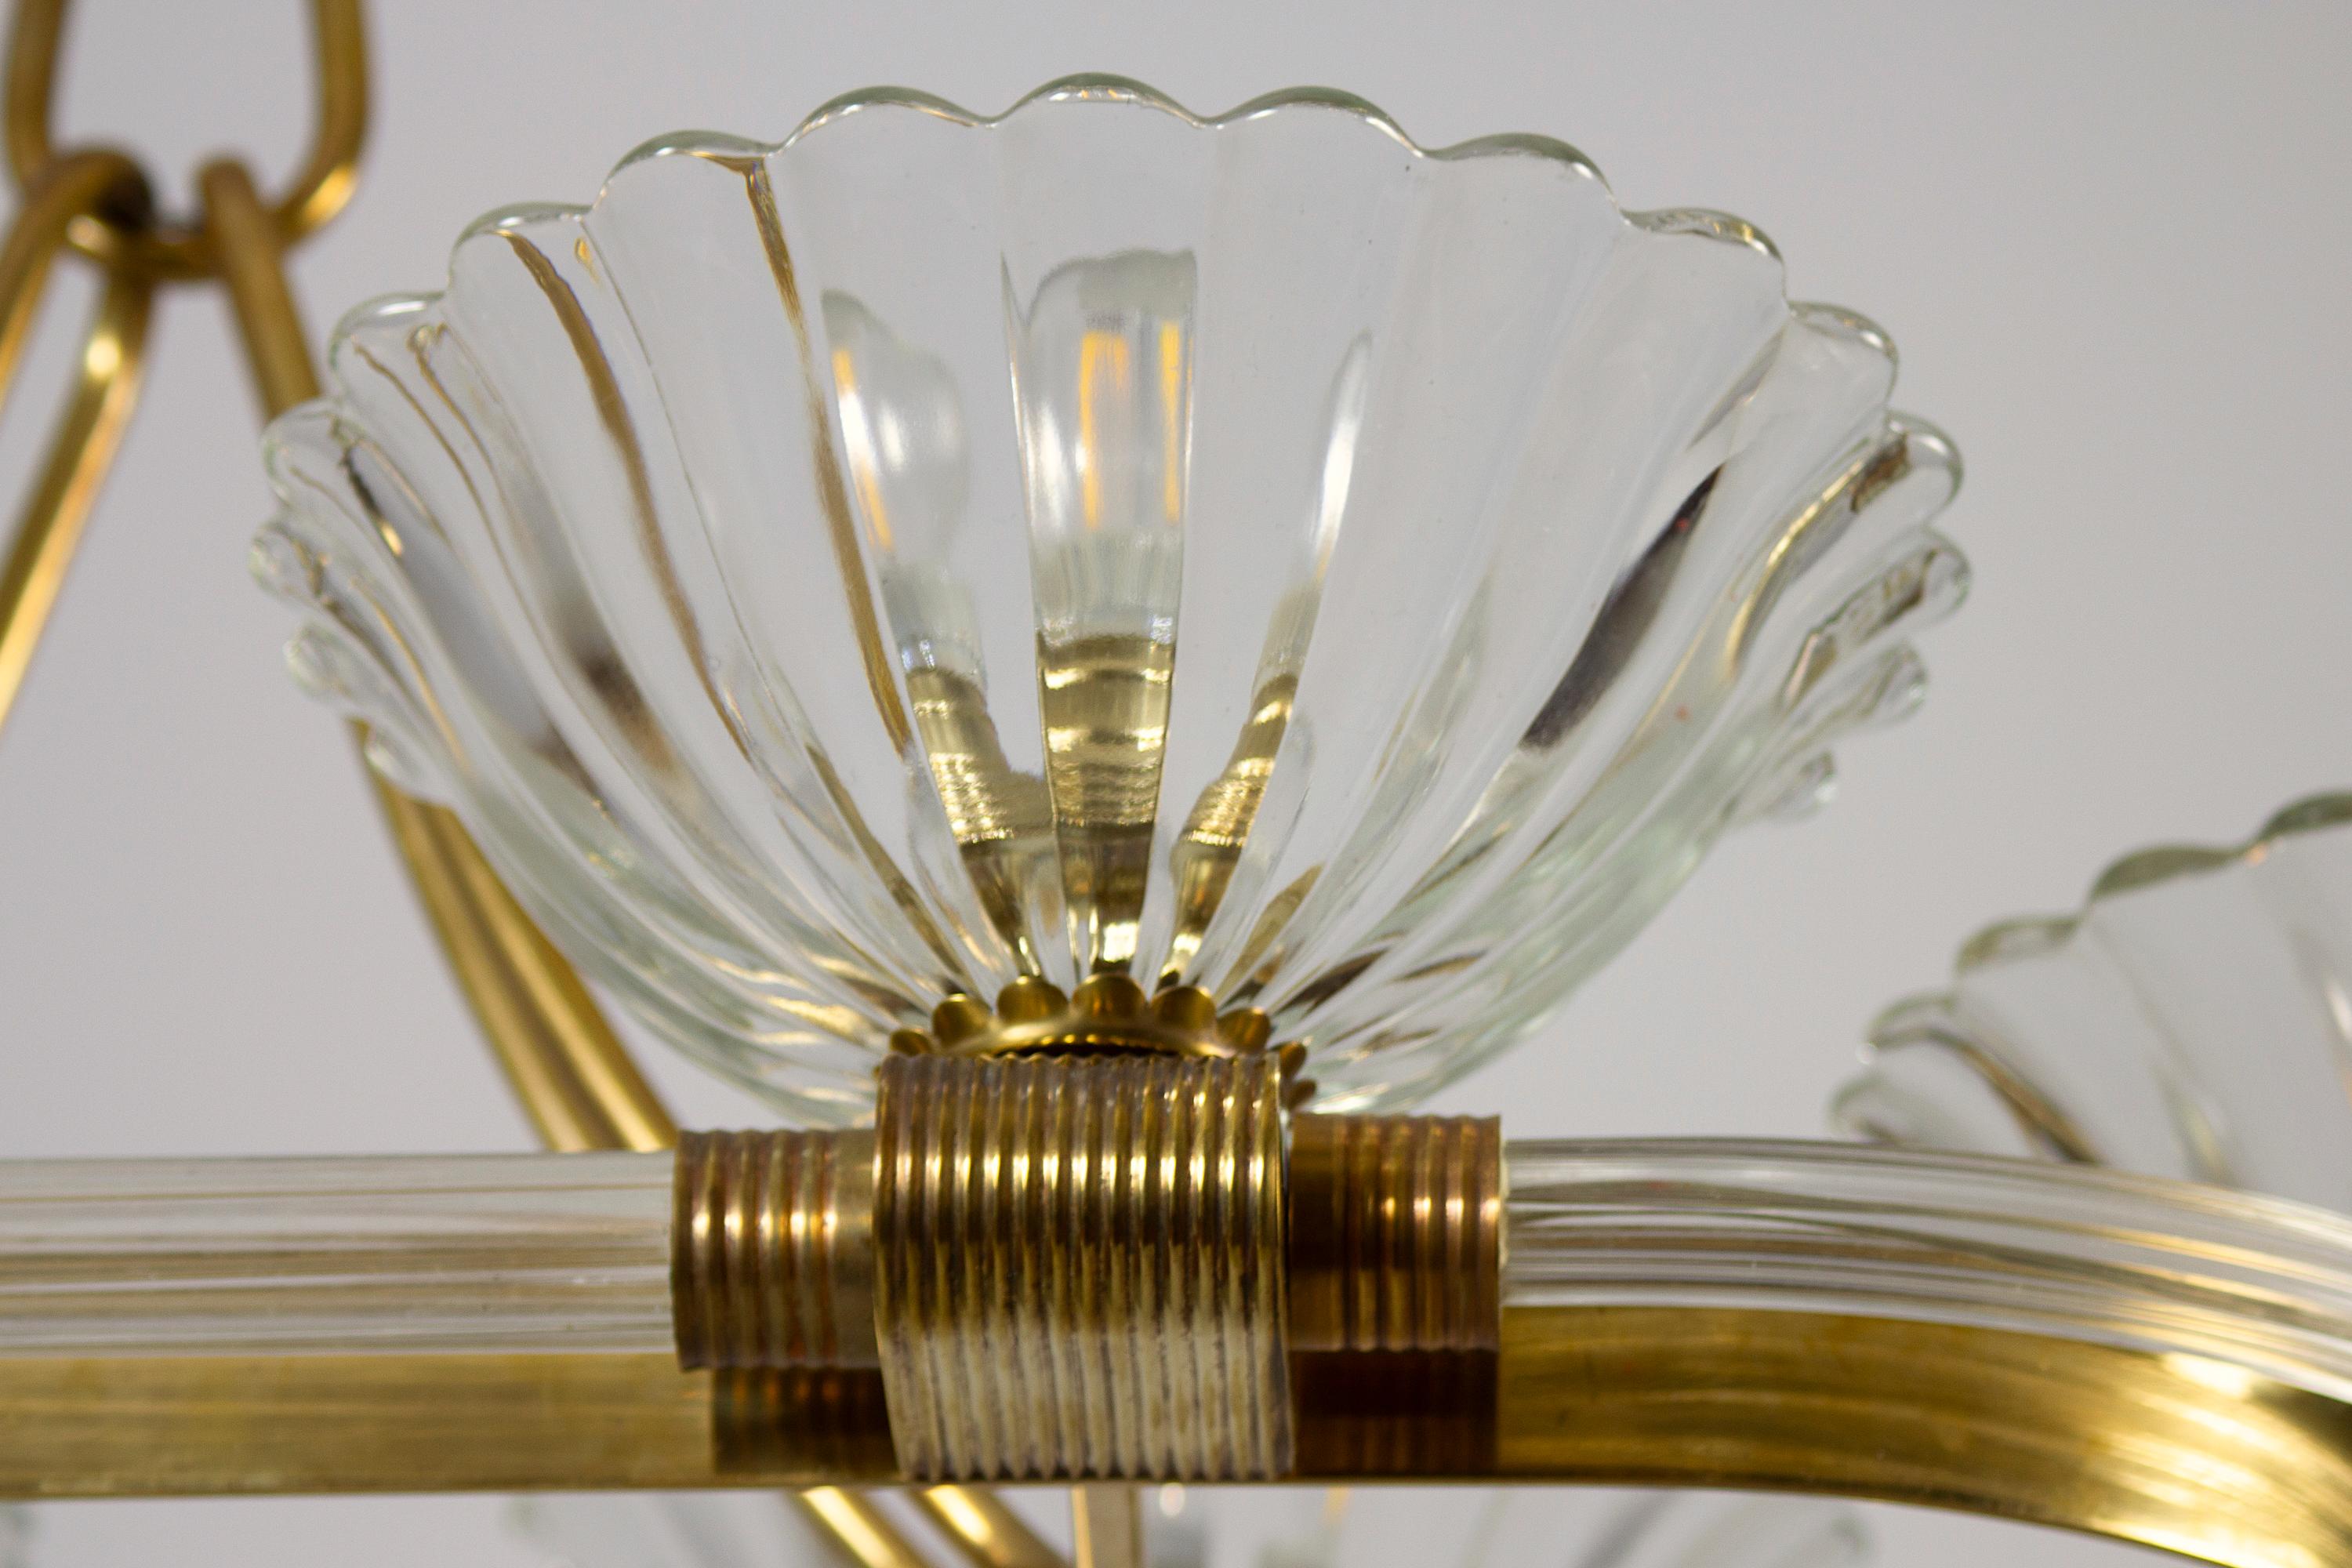  Art Deco Oval Shape Brass and Murano Glass Chandelier by Ercole Barovier 1940 For Sale 4